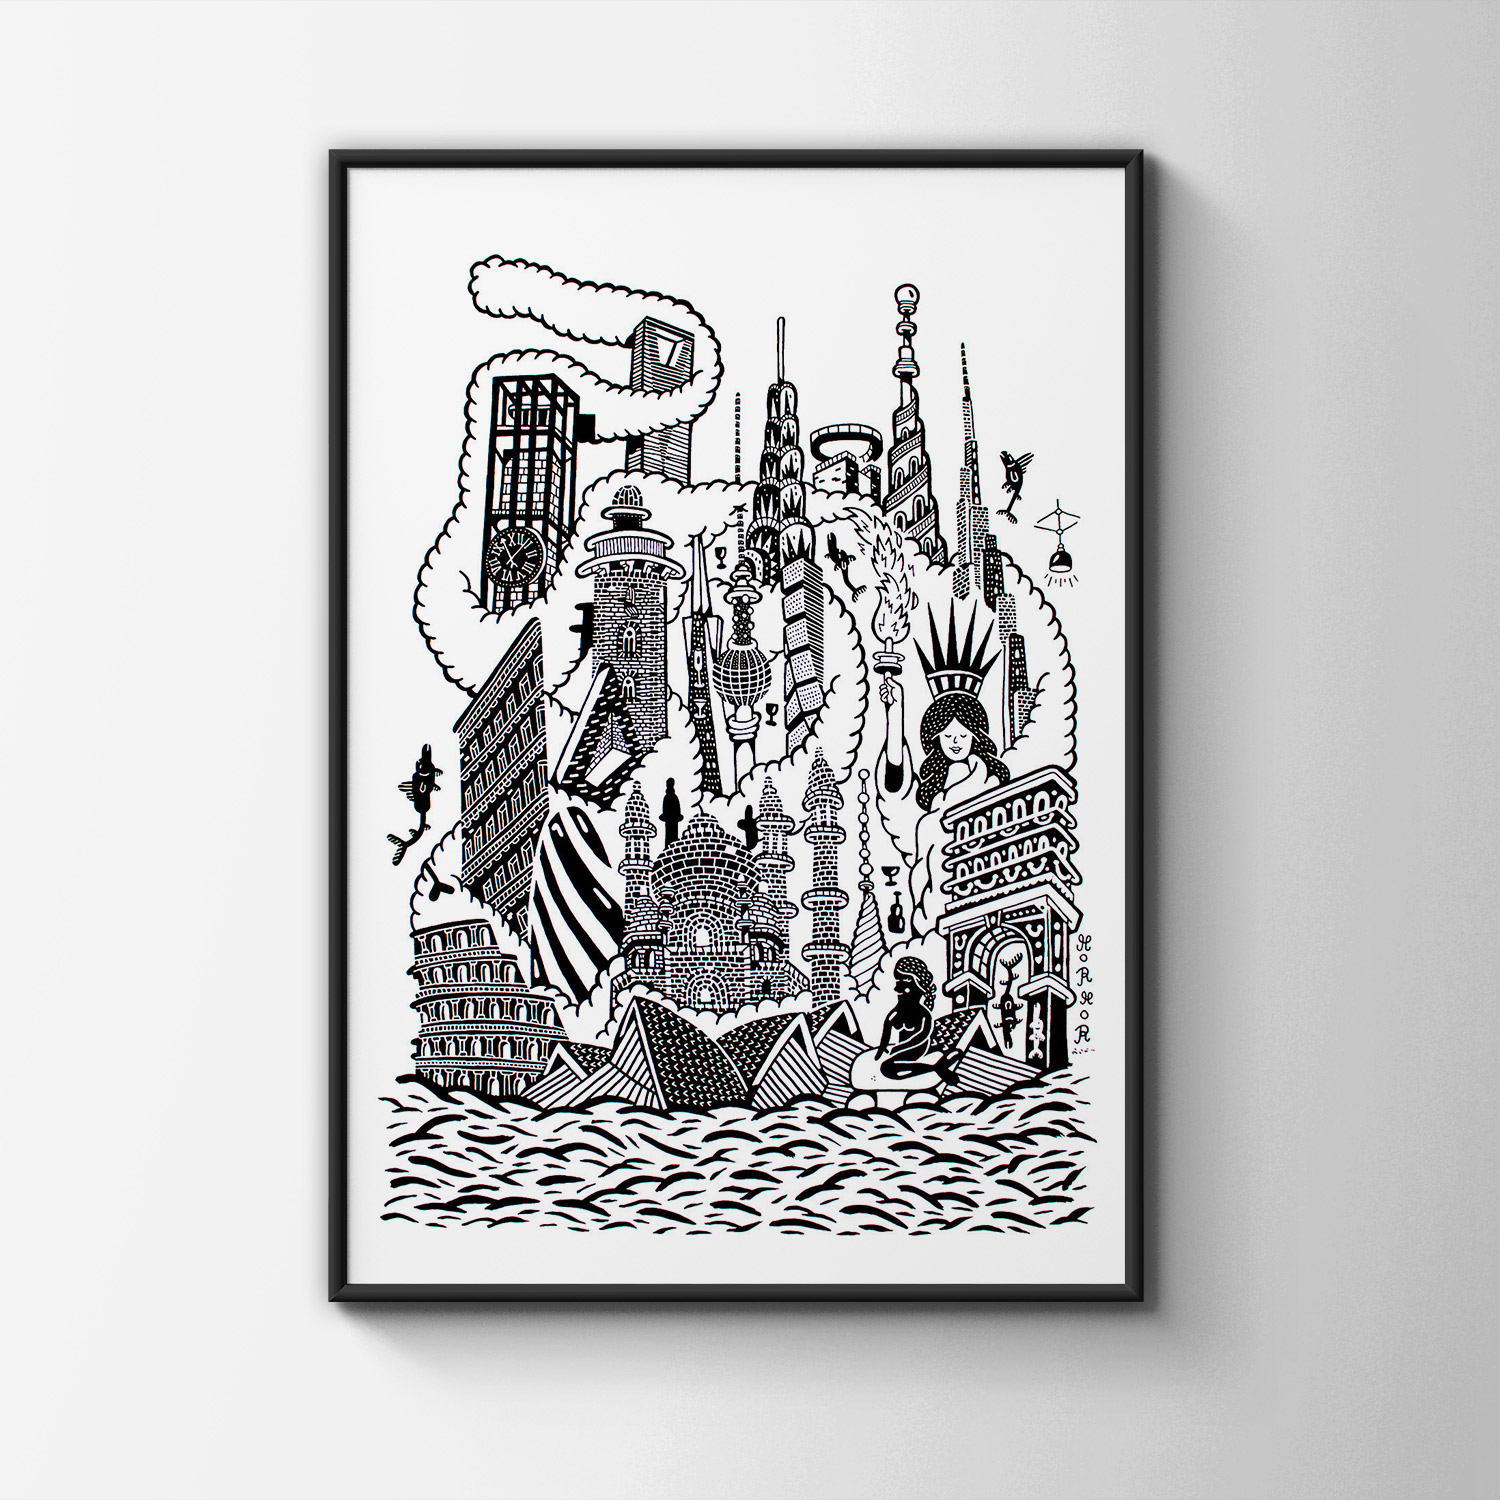 posters-prints, giclee-print, family-friendly, geometric, illustrative, monochrome, architecture, humor, oceans, black, white, ink, paper, amusing, architectural, beach, black-and-white, buildings, danish, decorative, design, fish, interior, interior-design, nordic, posters, scandinavien, sea, ships, water, Buy original high quality art. Paintings, drawings, limited edition prints & posters by talented artists.